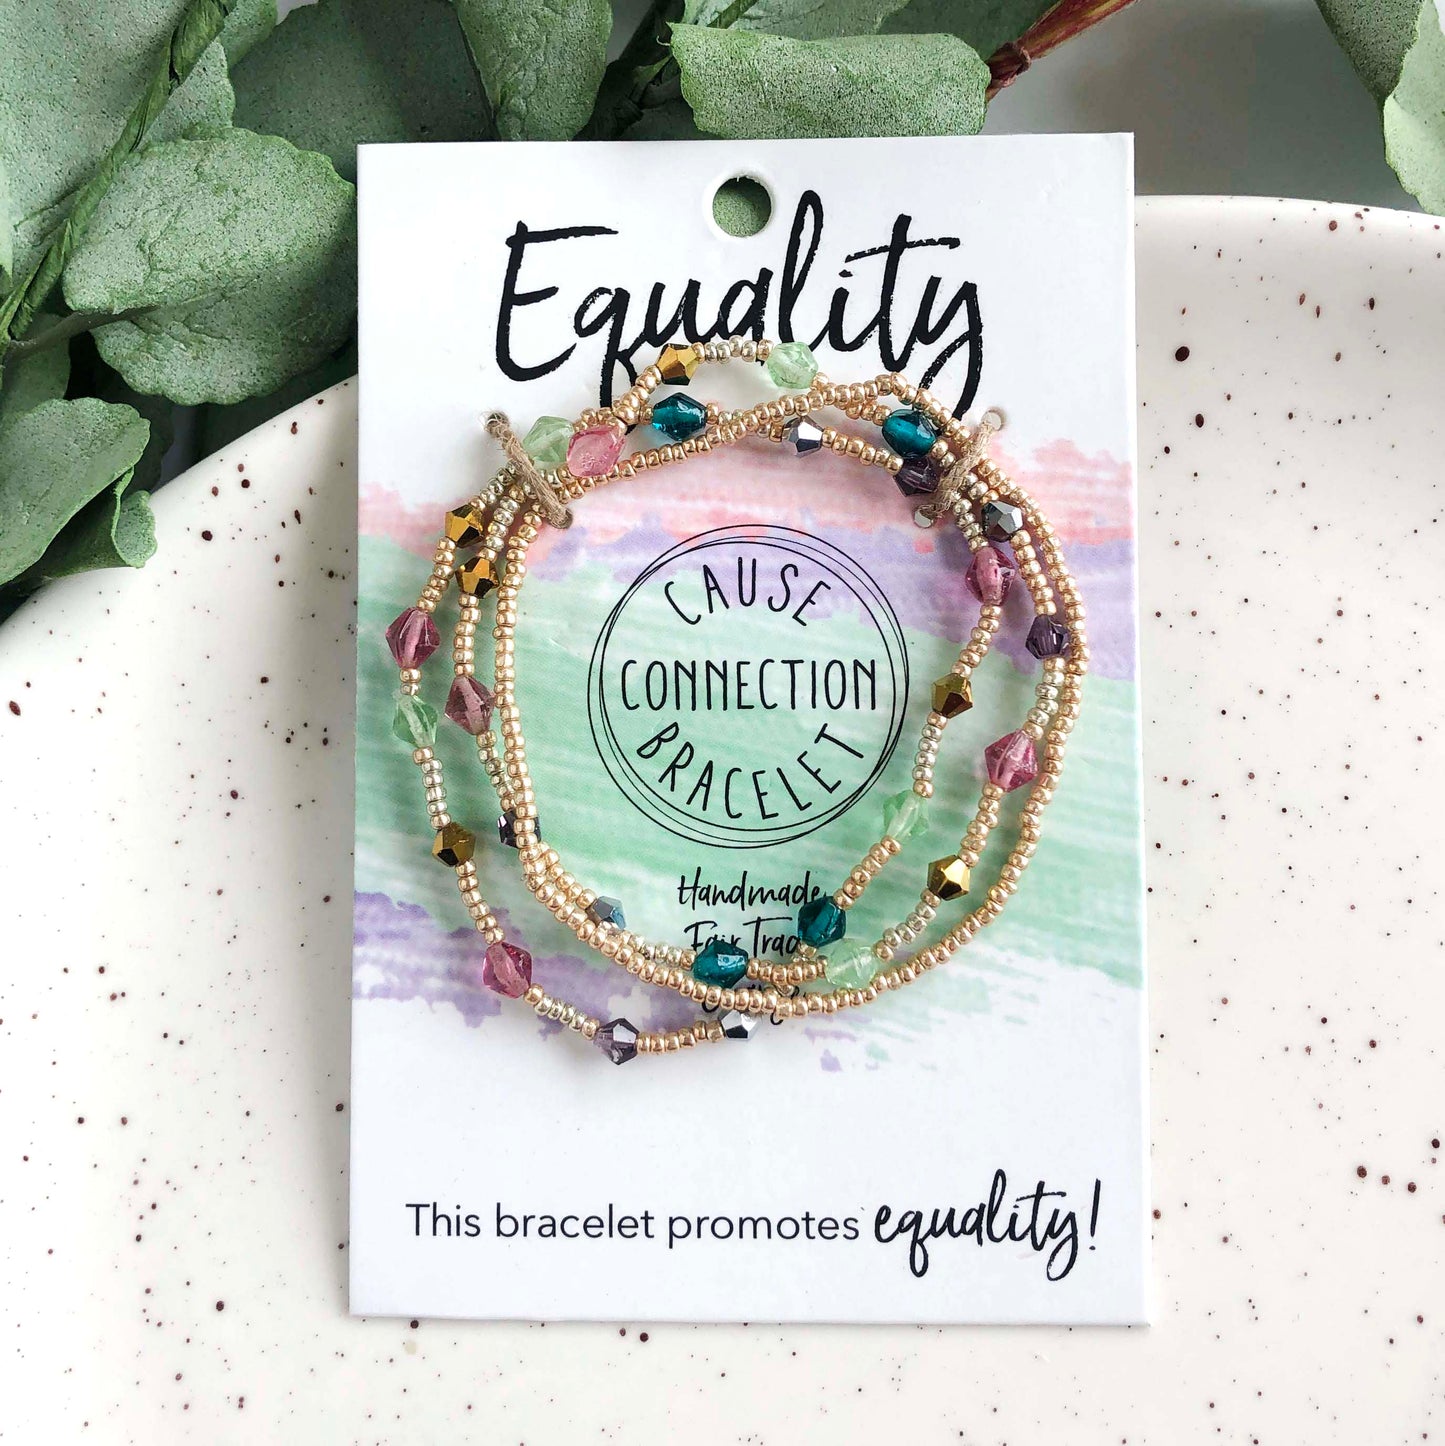 Equality Cause Connection Bracelet